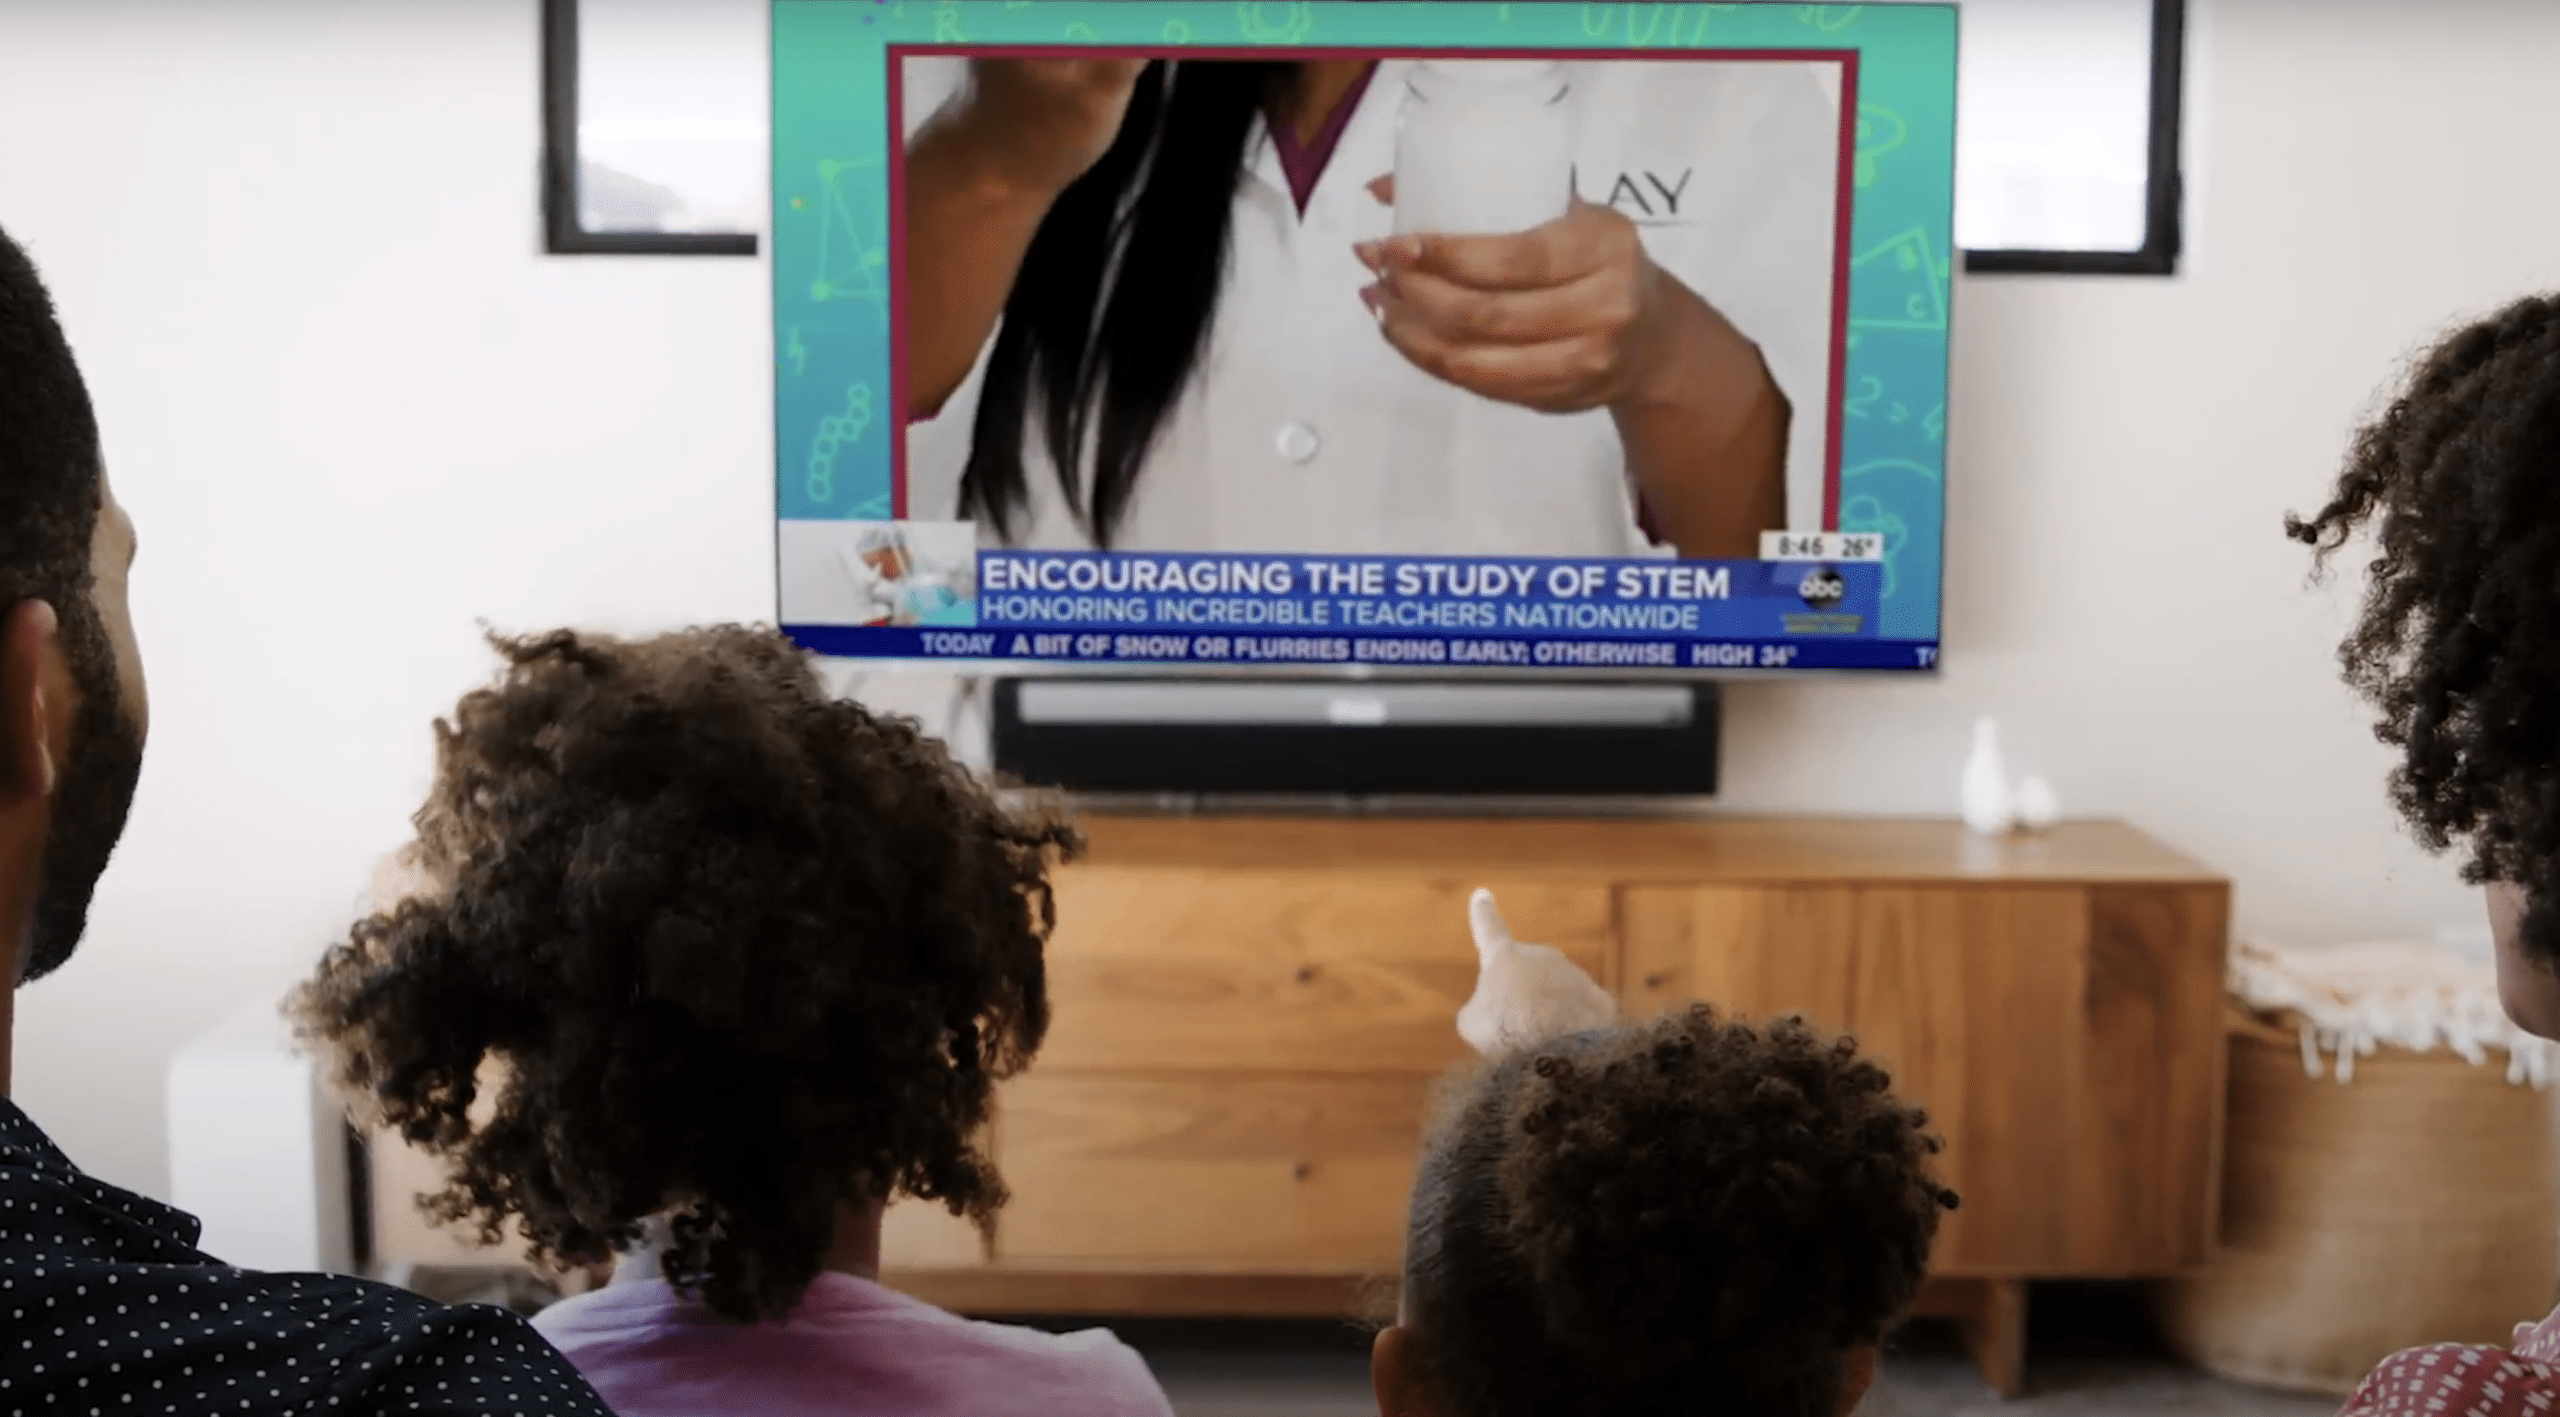 Olay activation on the news for STEM